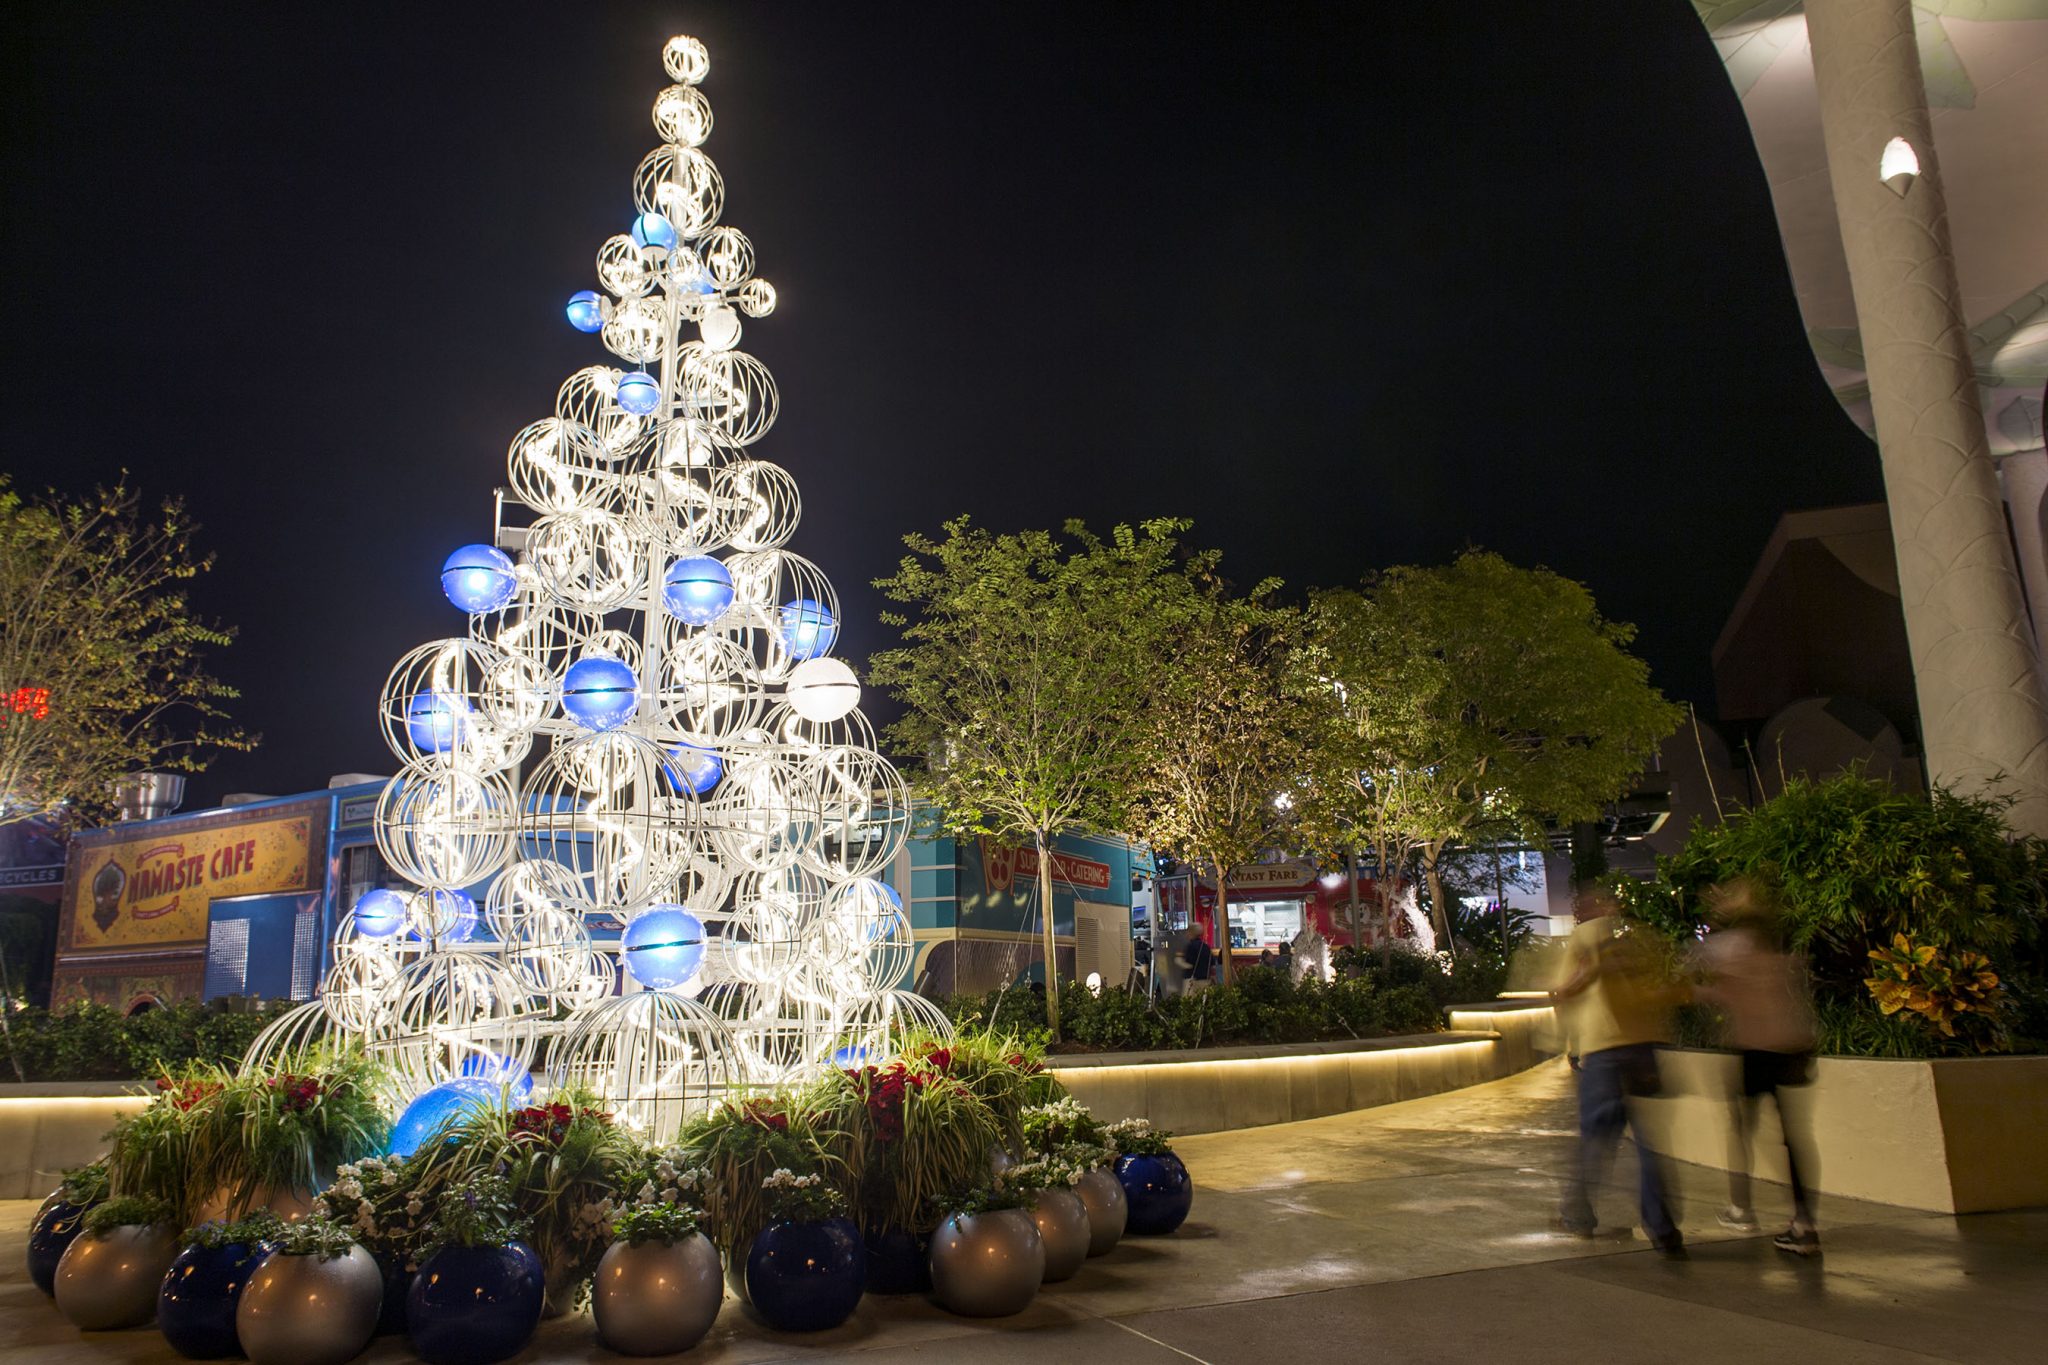 Guests will be transported to a magical winter wonderland as they visit the West Side neighborhood at Disney Springs with vibrant blue ornaments, beautiful white holiday lights, and contemporary Christmas trees. Each neighborhood in Disney Springs has been transformed into a unique holiday wonderland for the seasonÕs greetings, each reflecting the neighborhoodÕs role in the waterfront town. Disney Springs is the shopping, dining and entertainment venue at Walt Disney World Resort located in Lake Buena Vista, Florida.